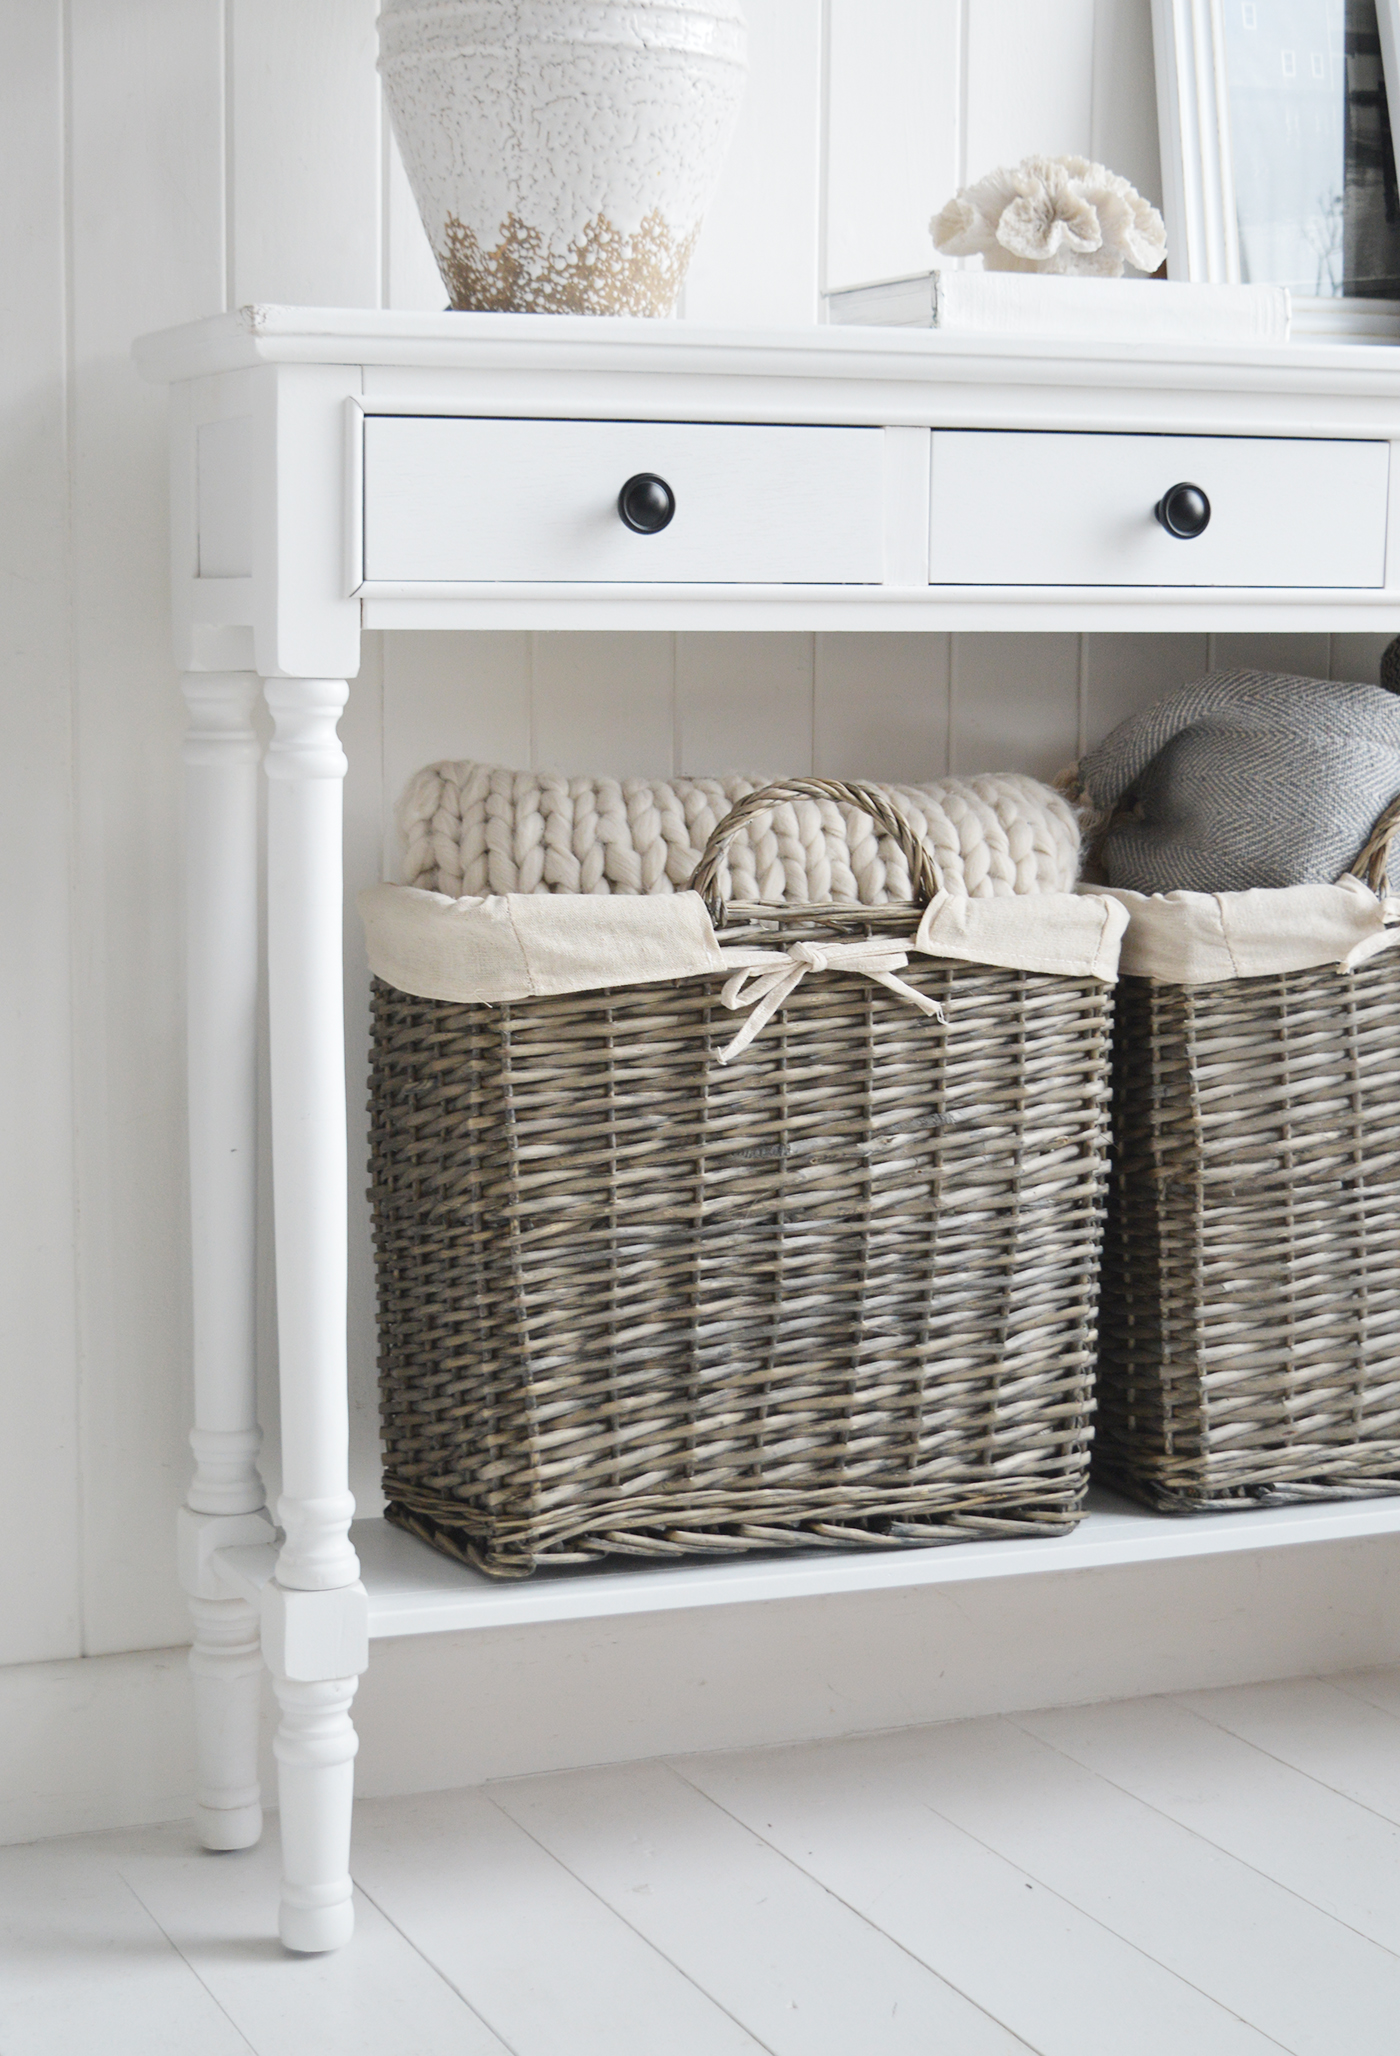 The Windsoe basket tidy under the narrow Georgetown white console table